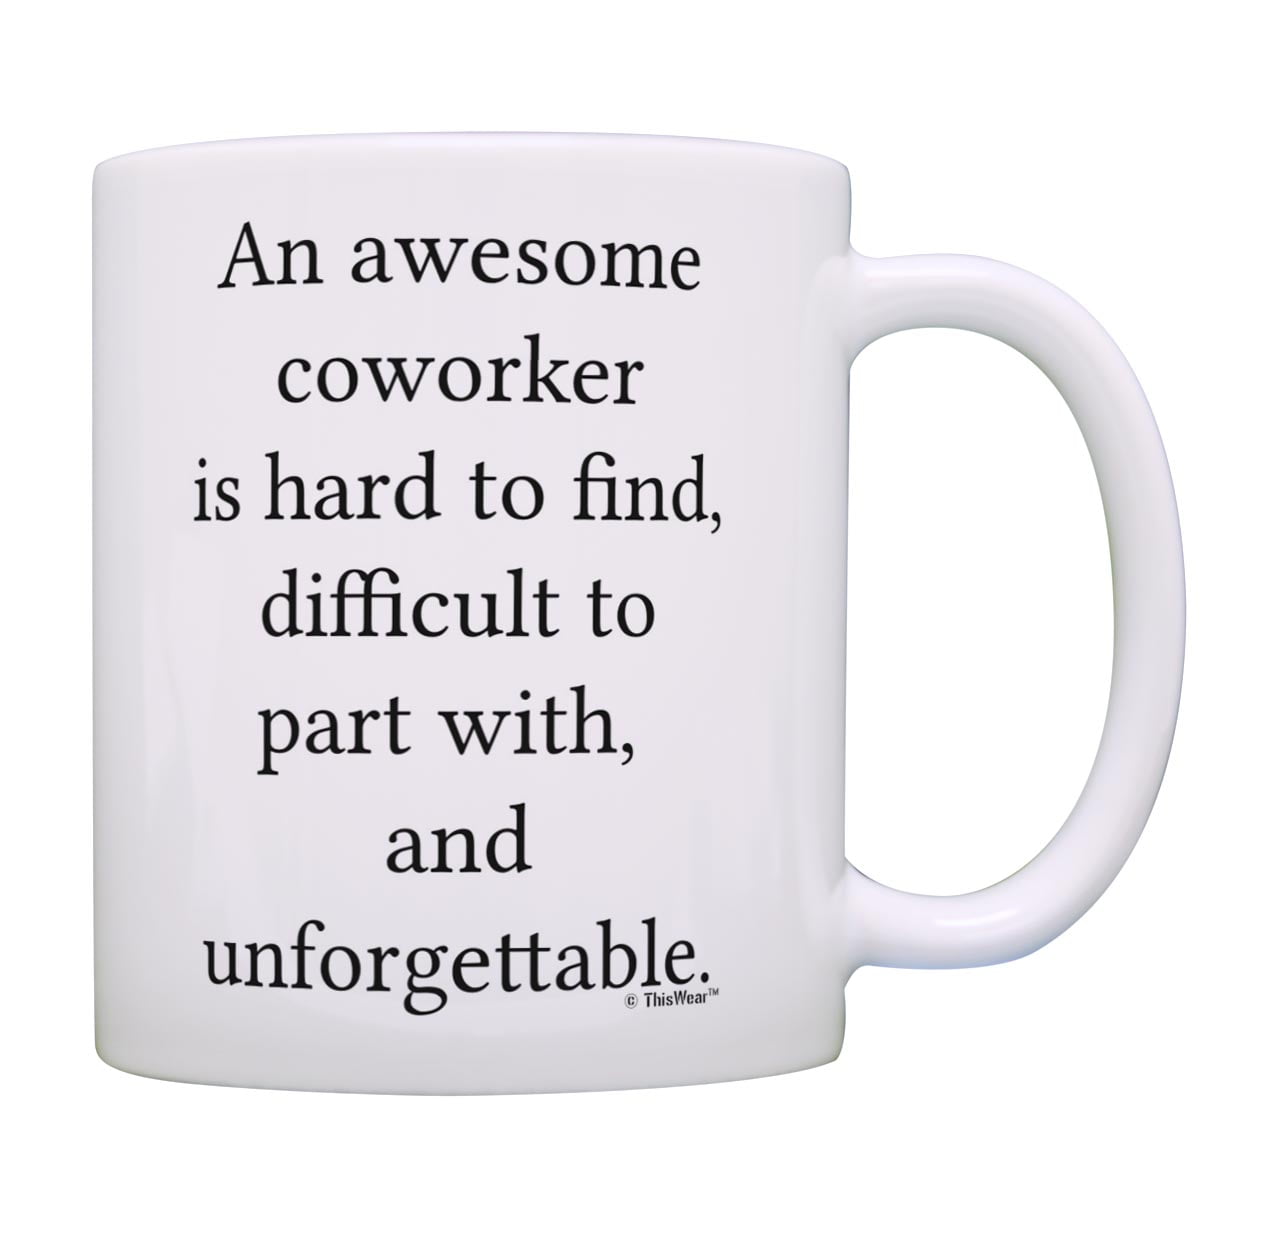 Larger 15oz Size I'm Here Because You BROKE Something For Coworker Boss Employee Cubemate Support Desk IT Help HelpDesk Work Humor Coffee Mugs I'm Here Because You BROKE Something